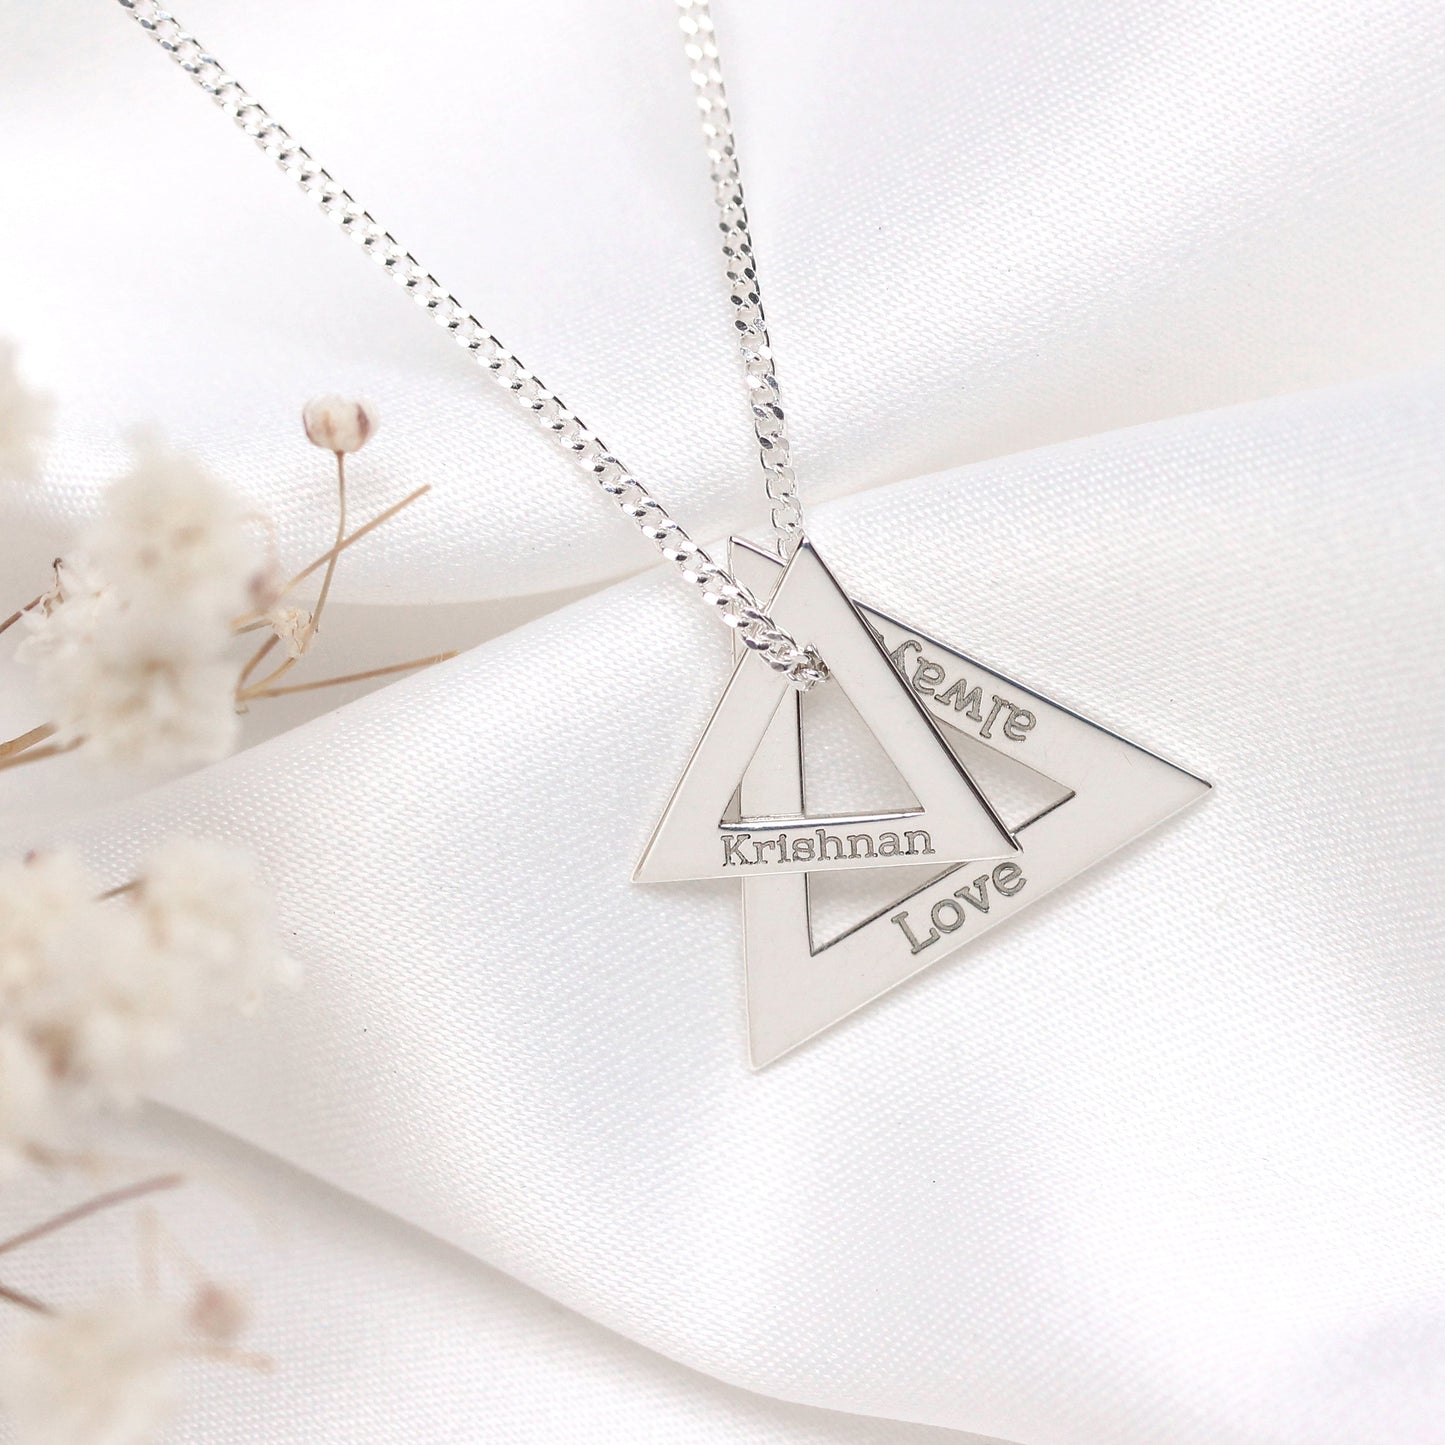 Personalised Sterling Silver Family Name Triangle Necklace